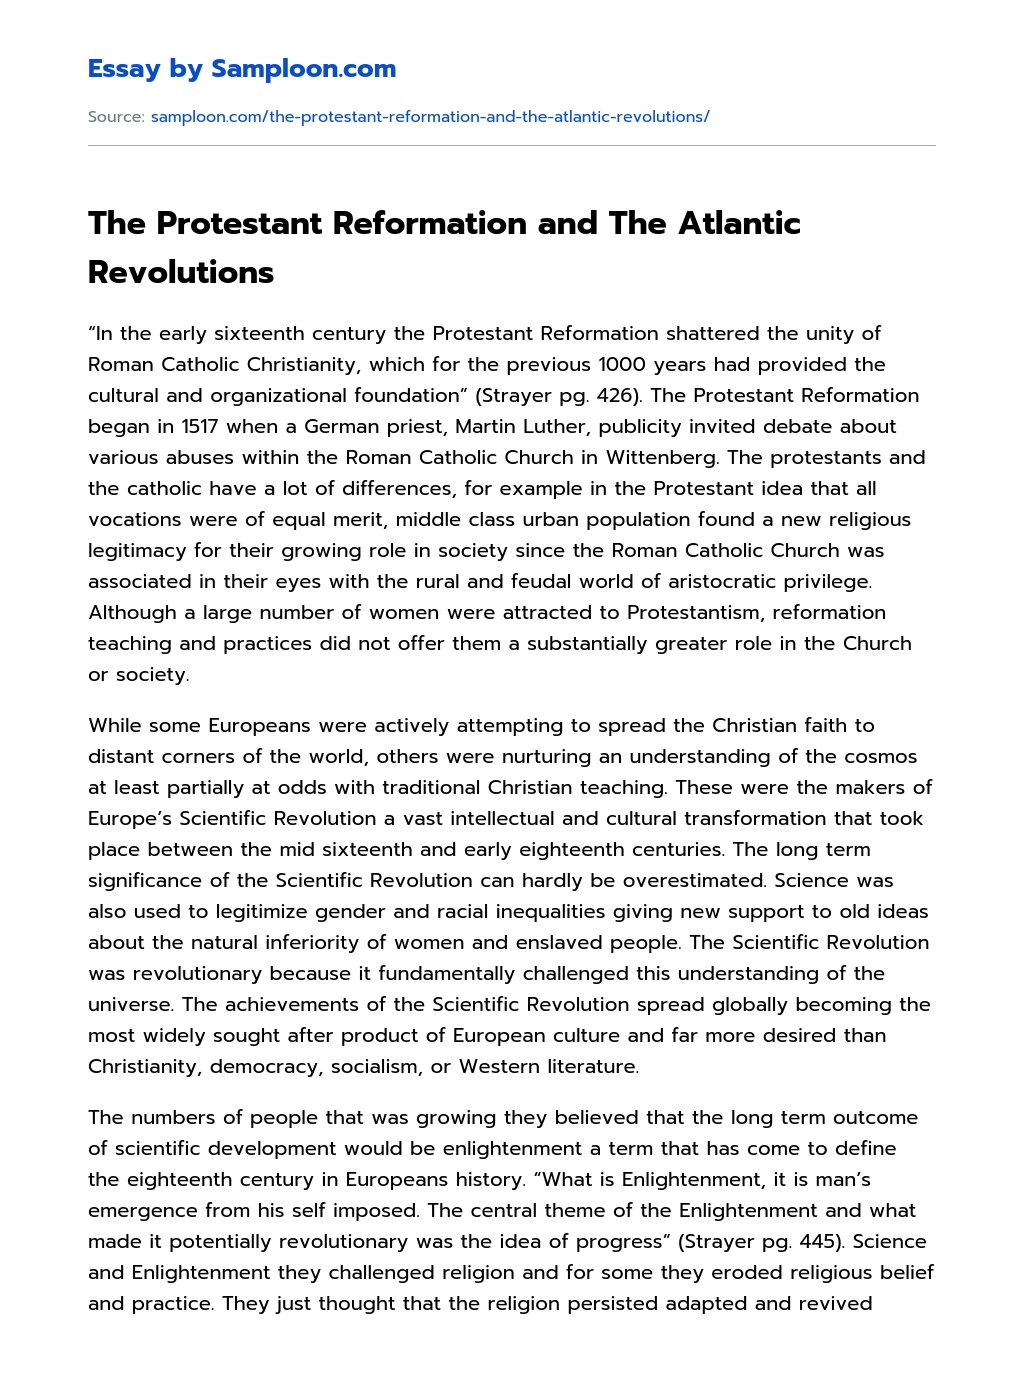 The Protestant Reformation and The Atlantic Revolutions essay